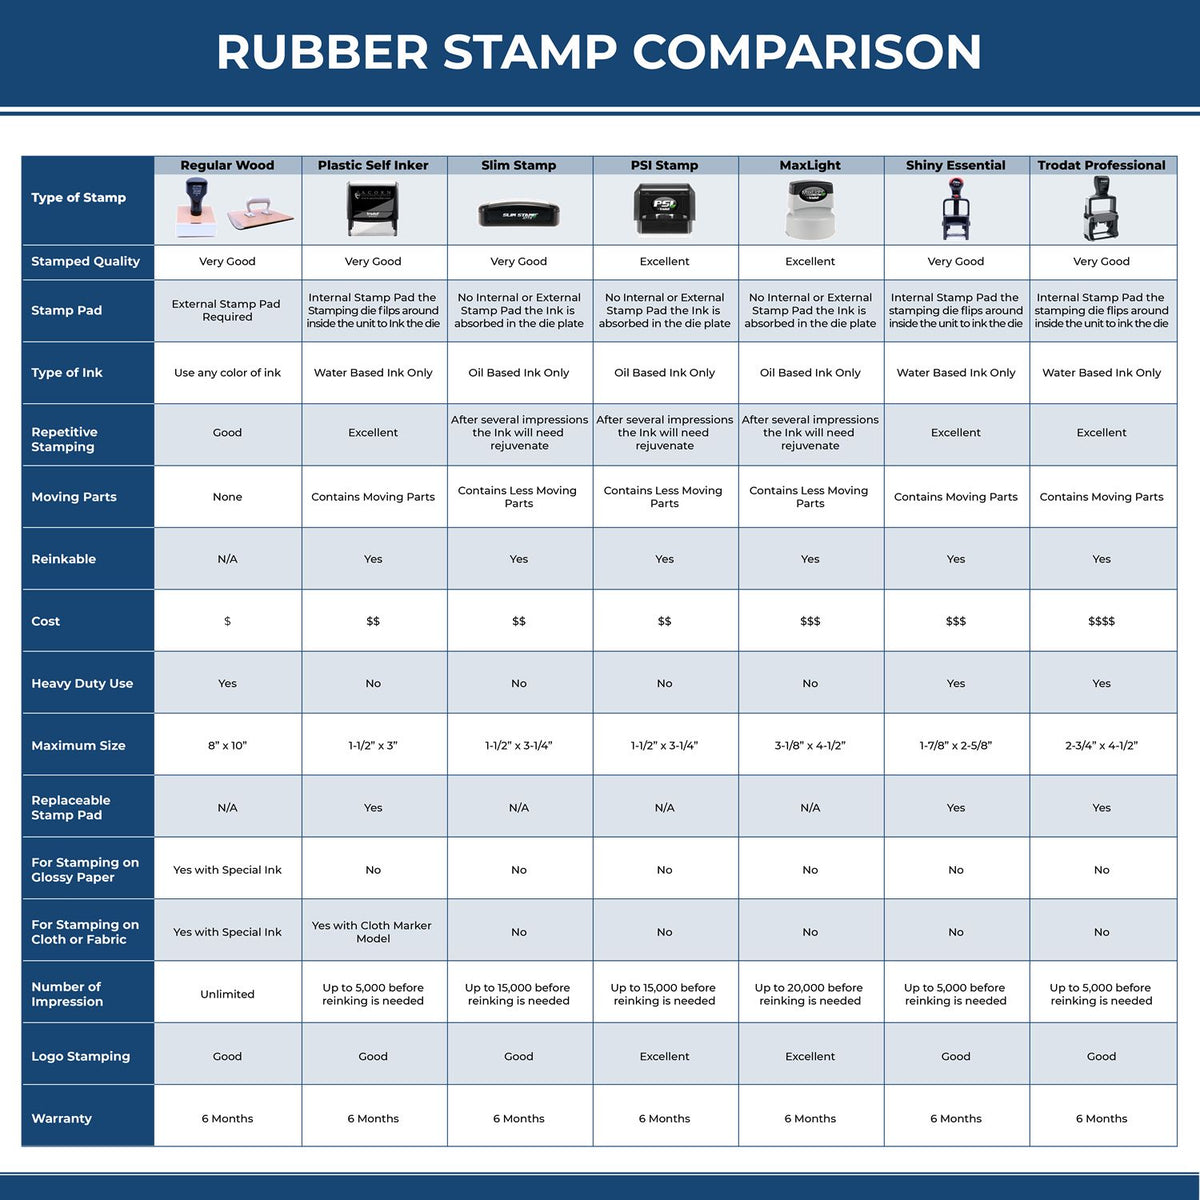 Large Coumadin Patient Rubber Stamp 4530R Rubber Stamp Comparison